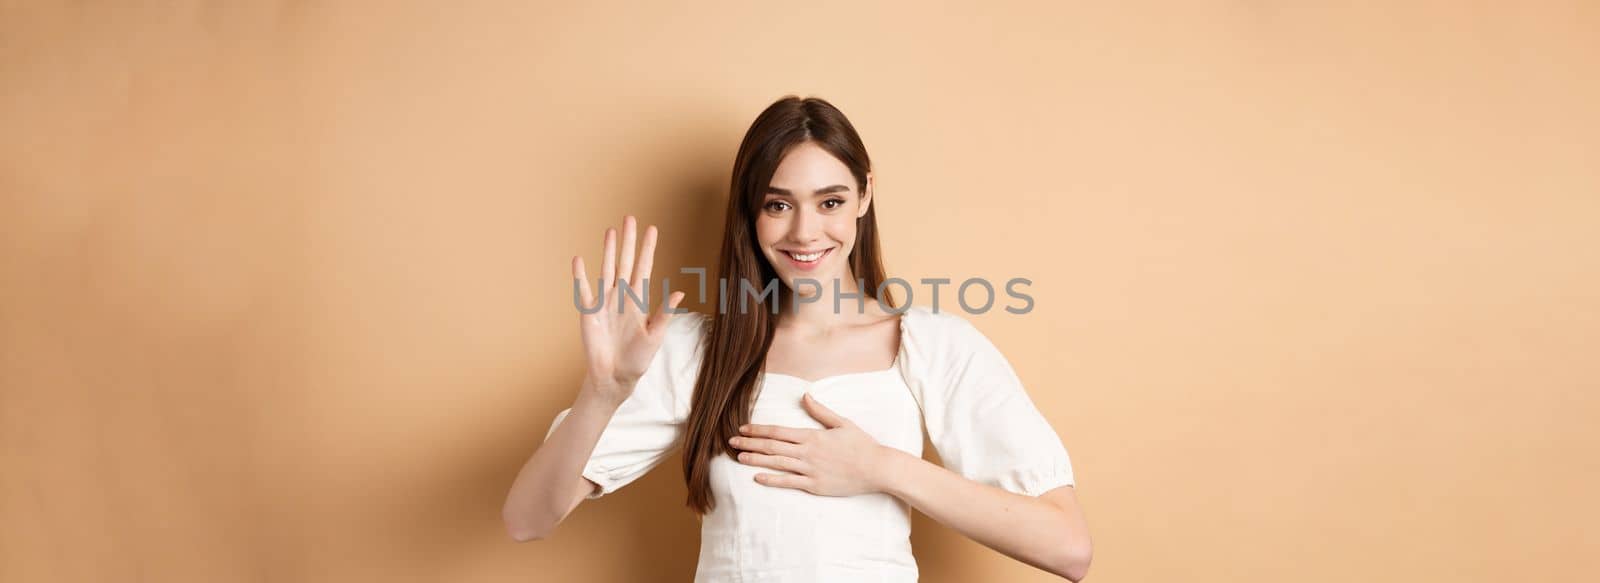 Cute smiling girl make promise, put hand on heart and tell truth, being honest, swearing to you, standing on beige background.